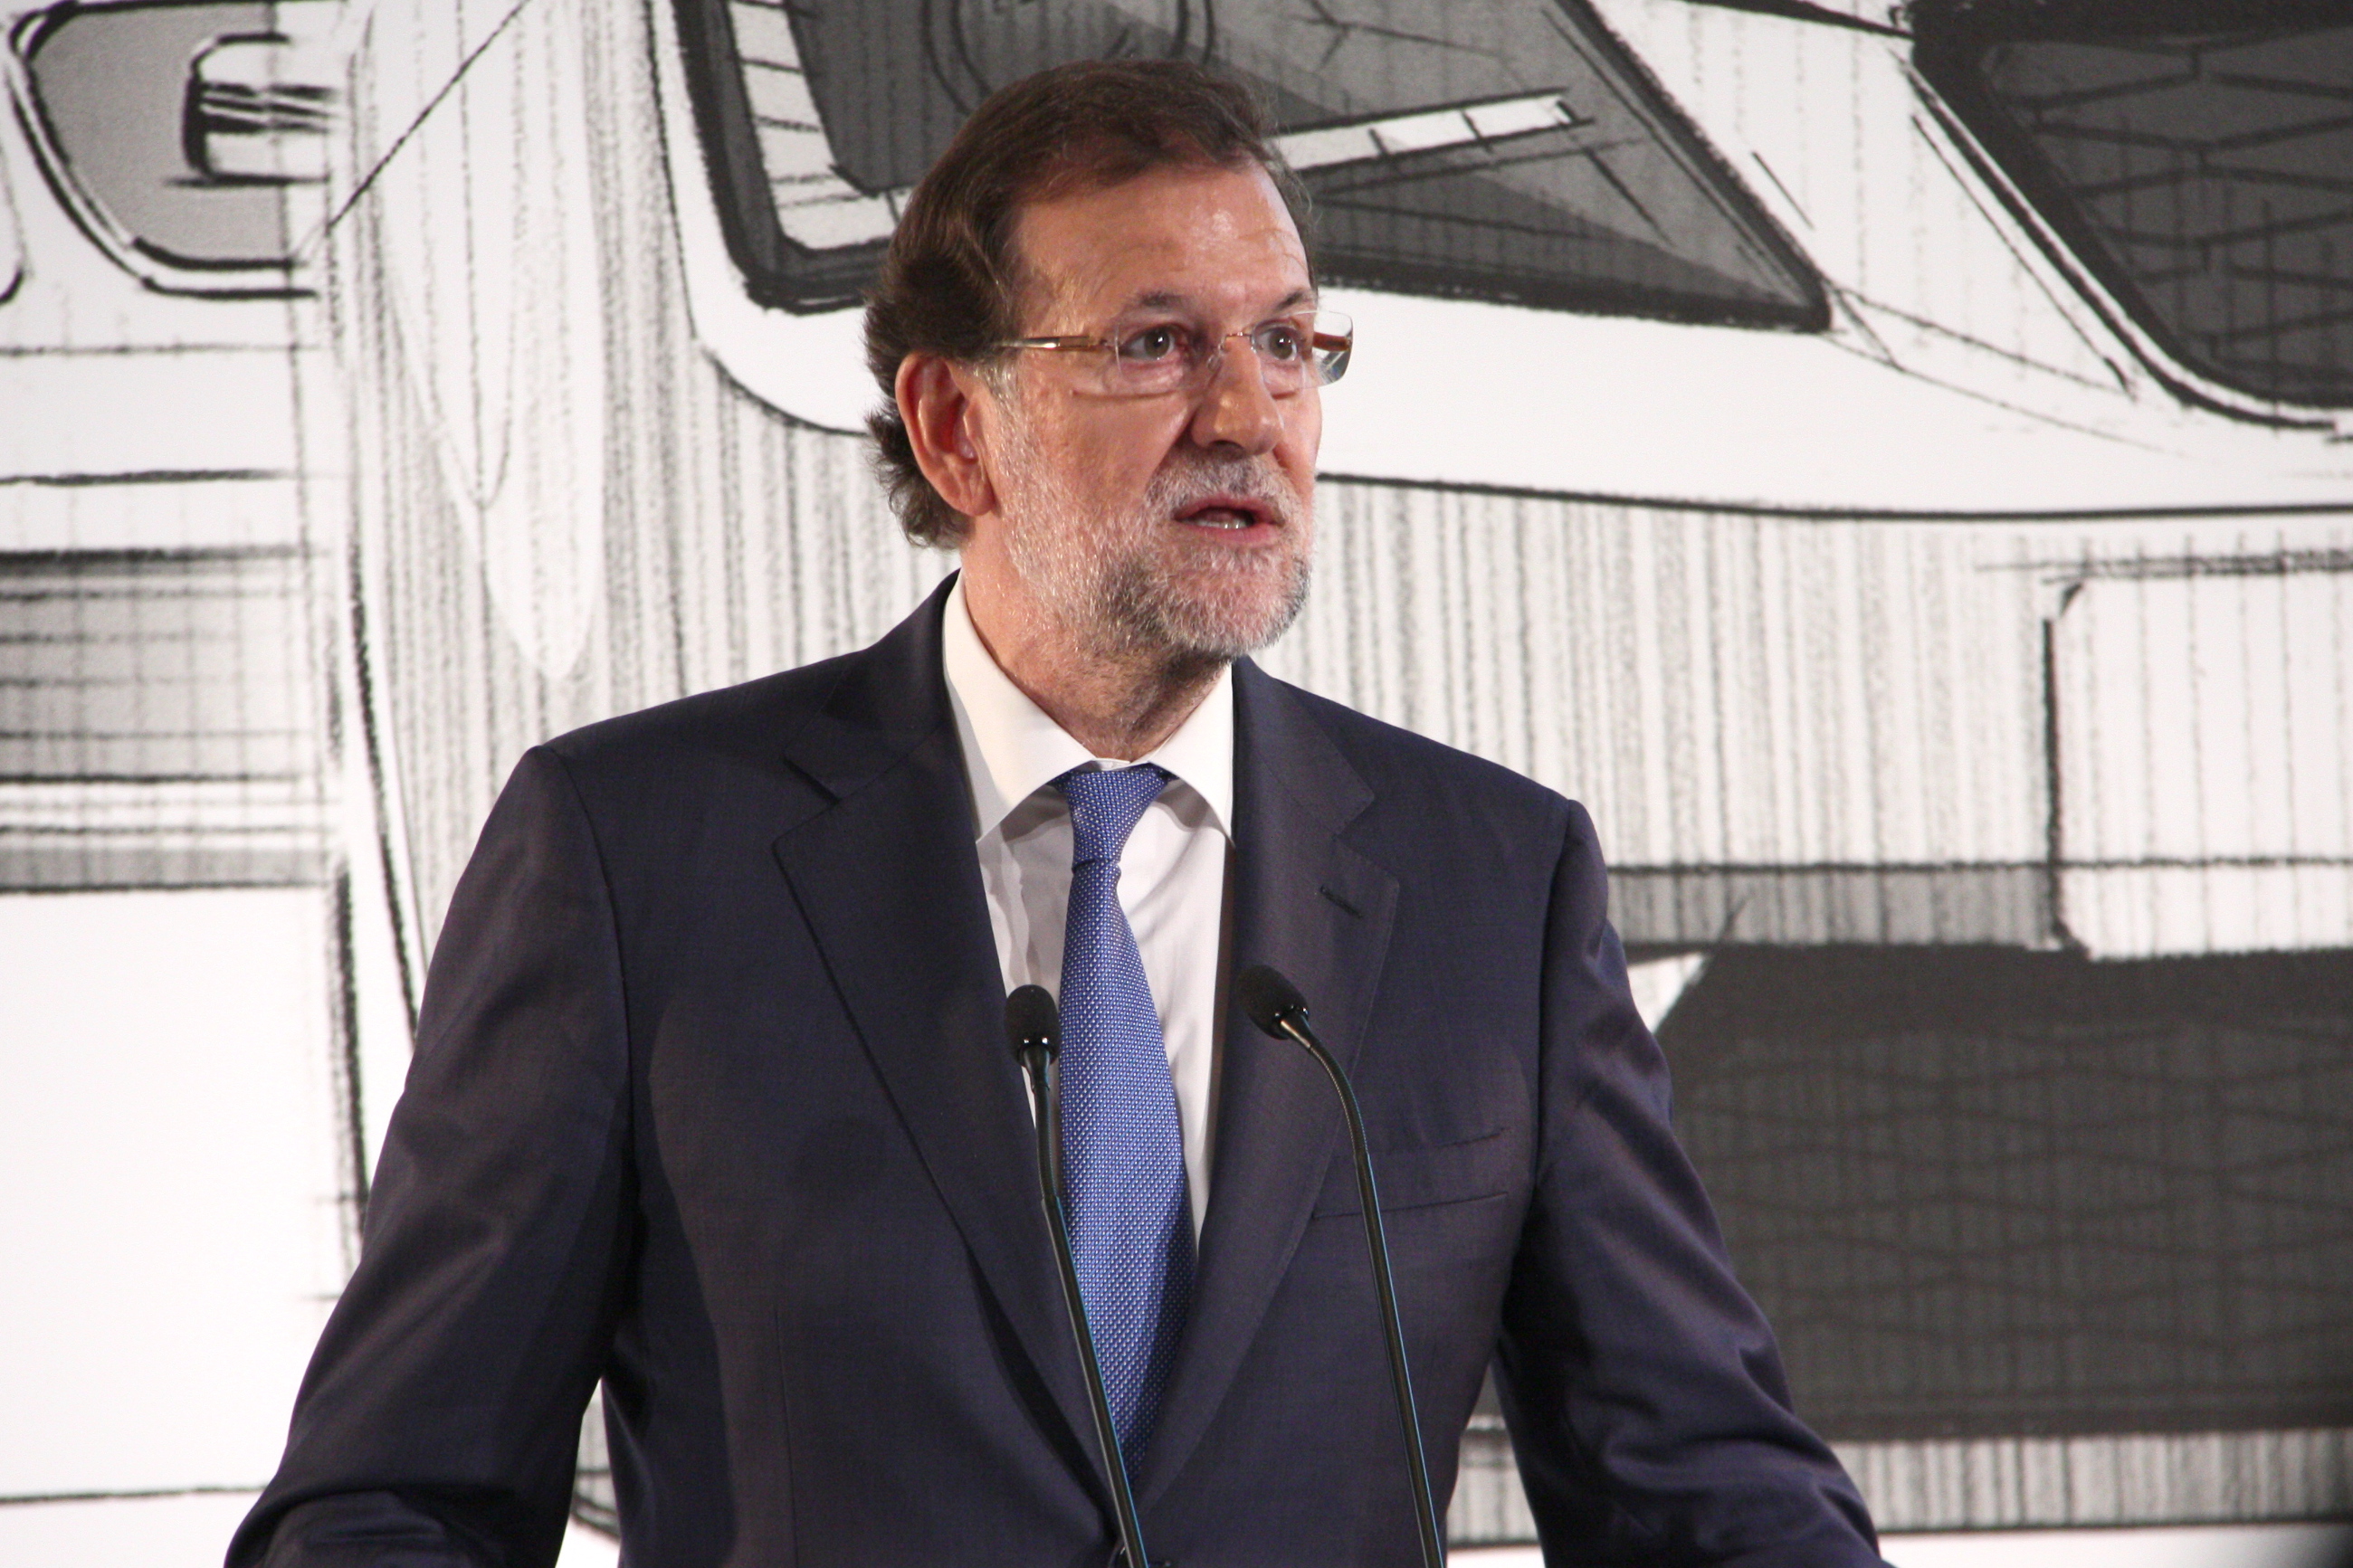 Spanish Prime Minister, Mariano Rajoy, at SEAT factory in Martorell (by ACN)